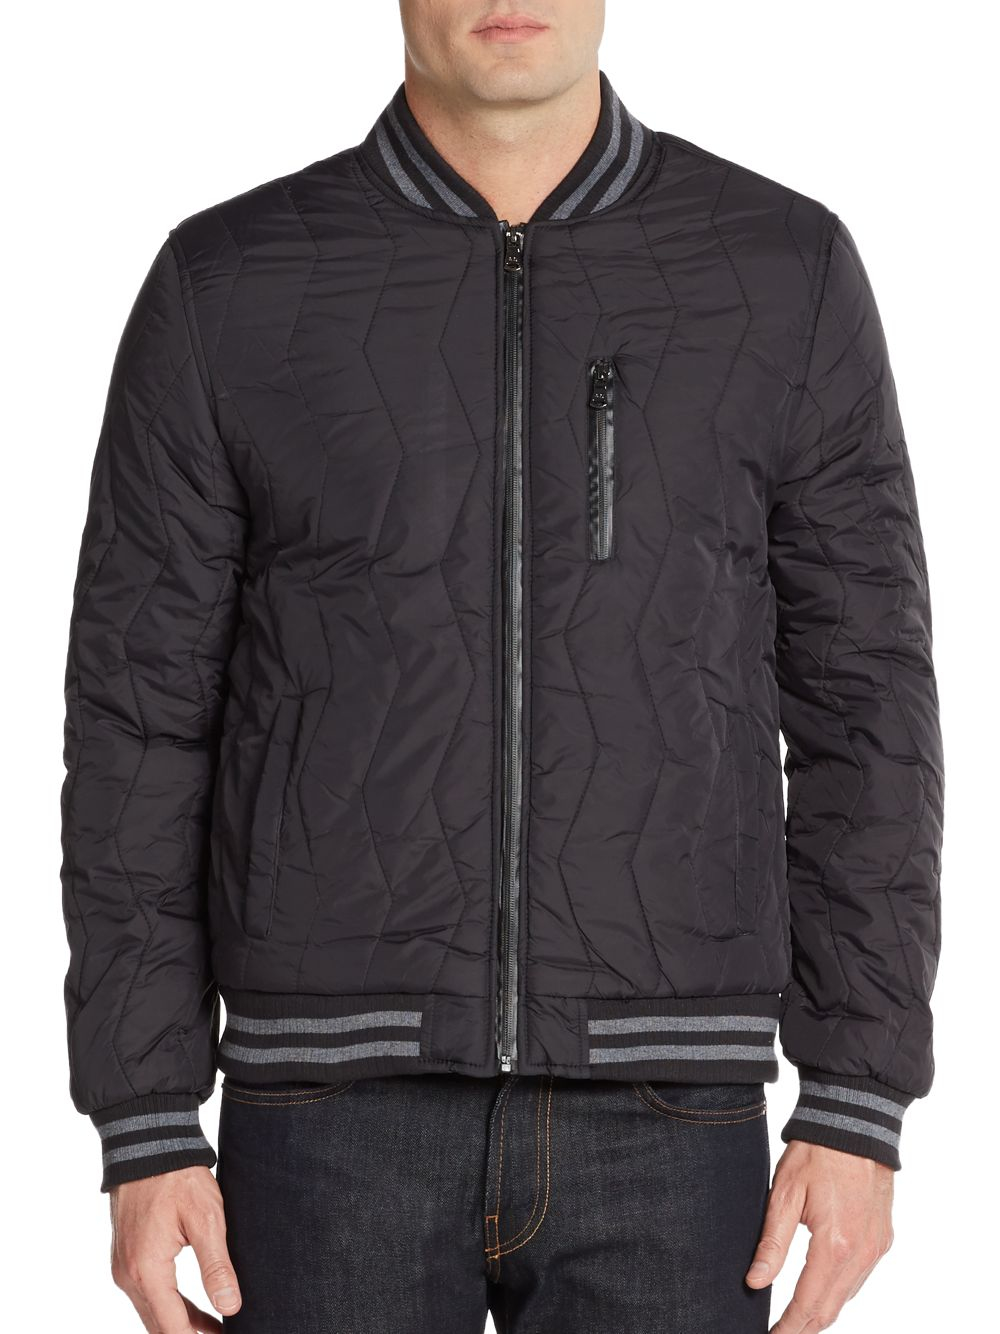 American stitch Zigzag-quilted Nylon Bomber Jacket in Black for Men | Lyst